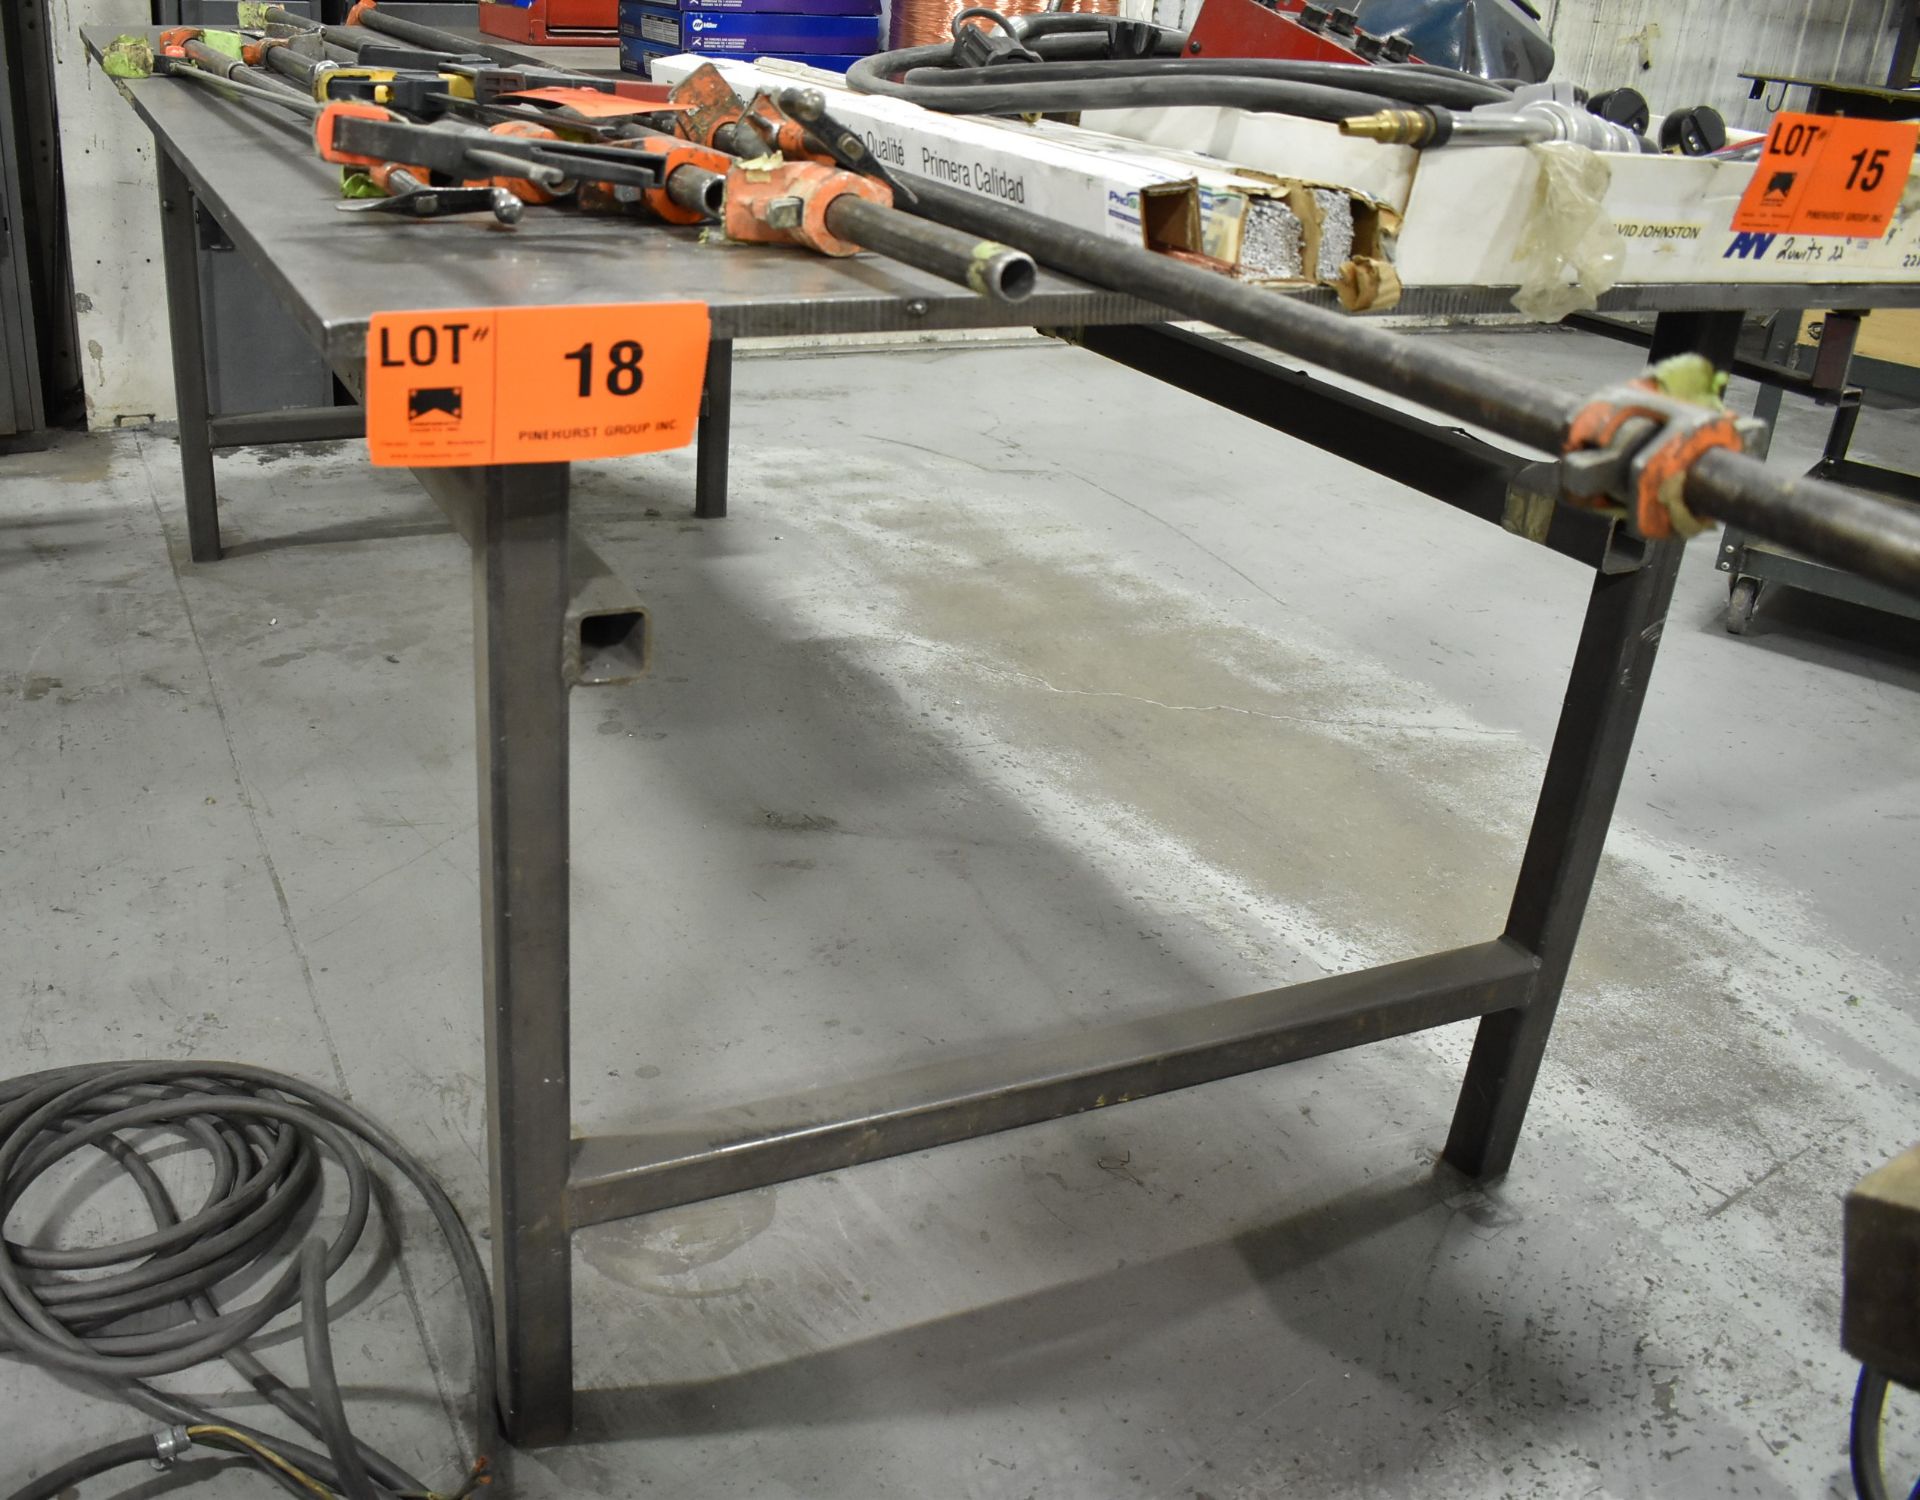 STEEL WELDING TABLE (DELAYED DELIVERY) [RIGGING FEES FOR LOT #18 - $25 USD PLUS APPLICABLE TAXES]